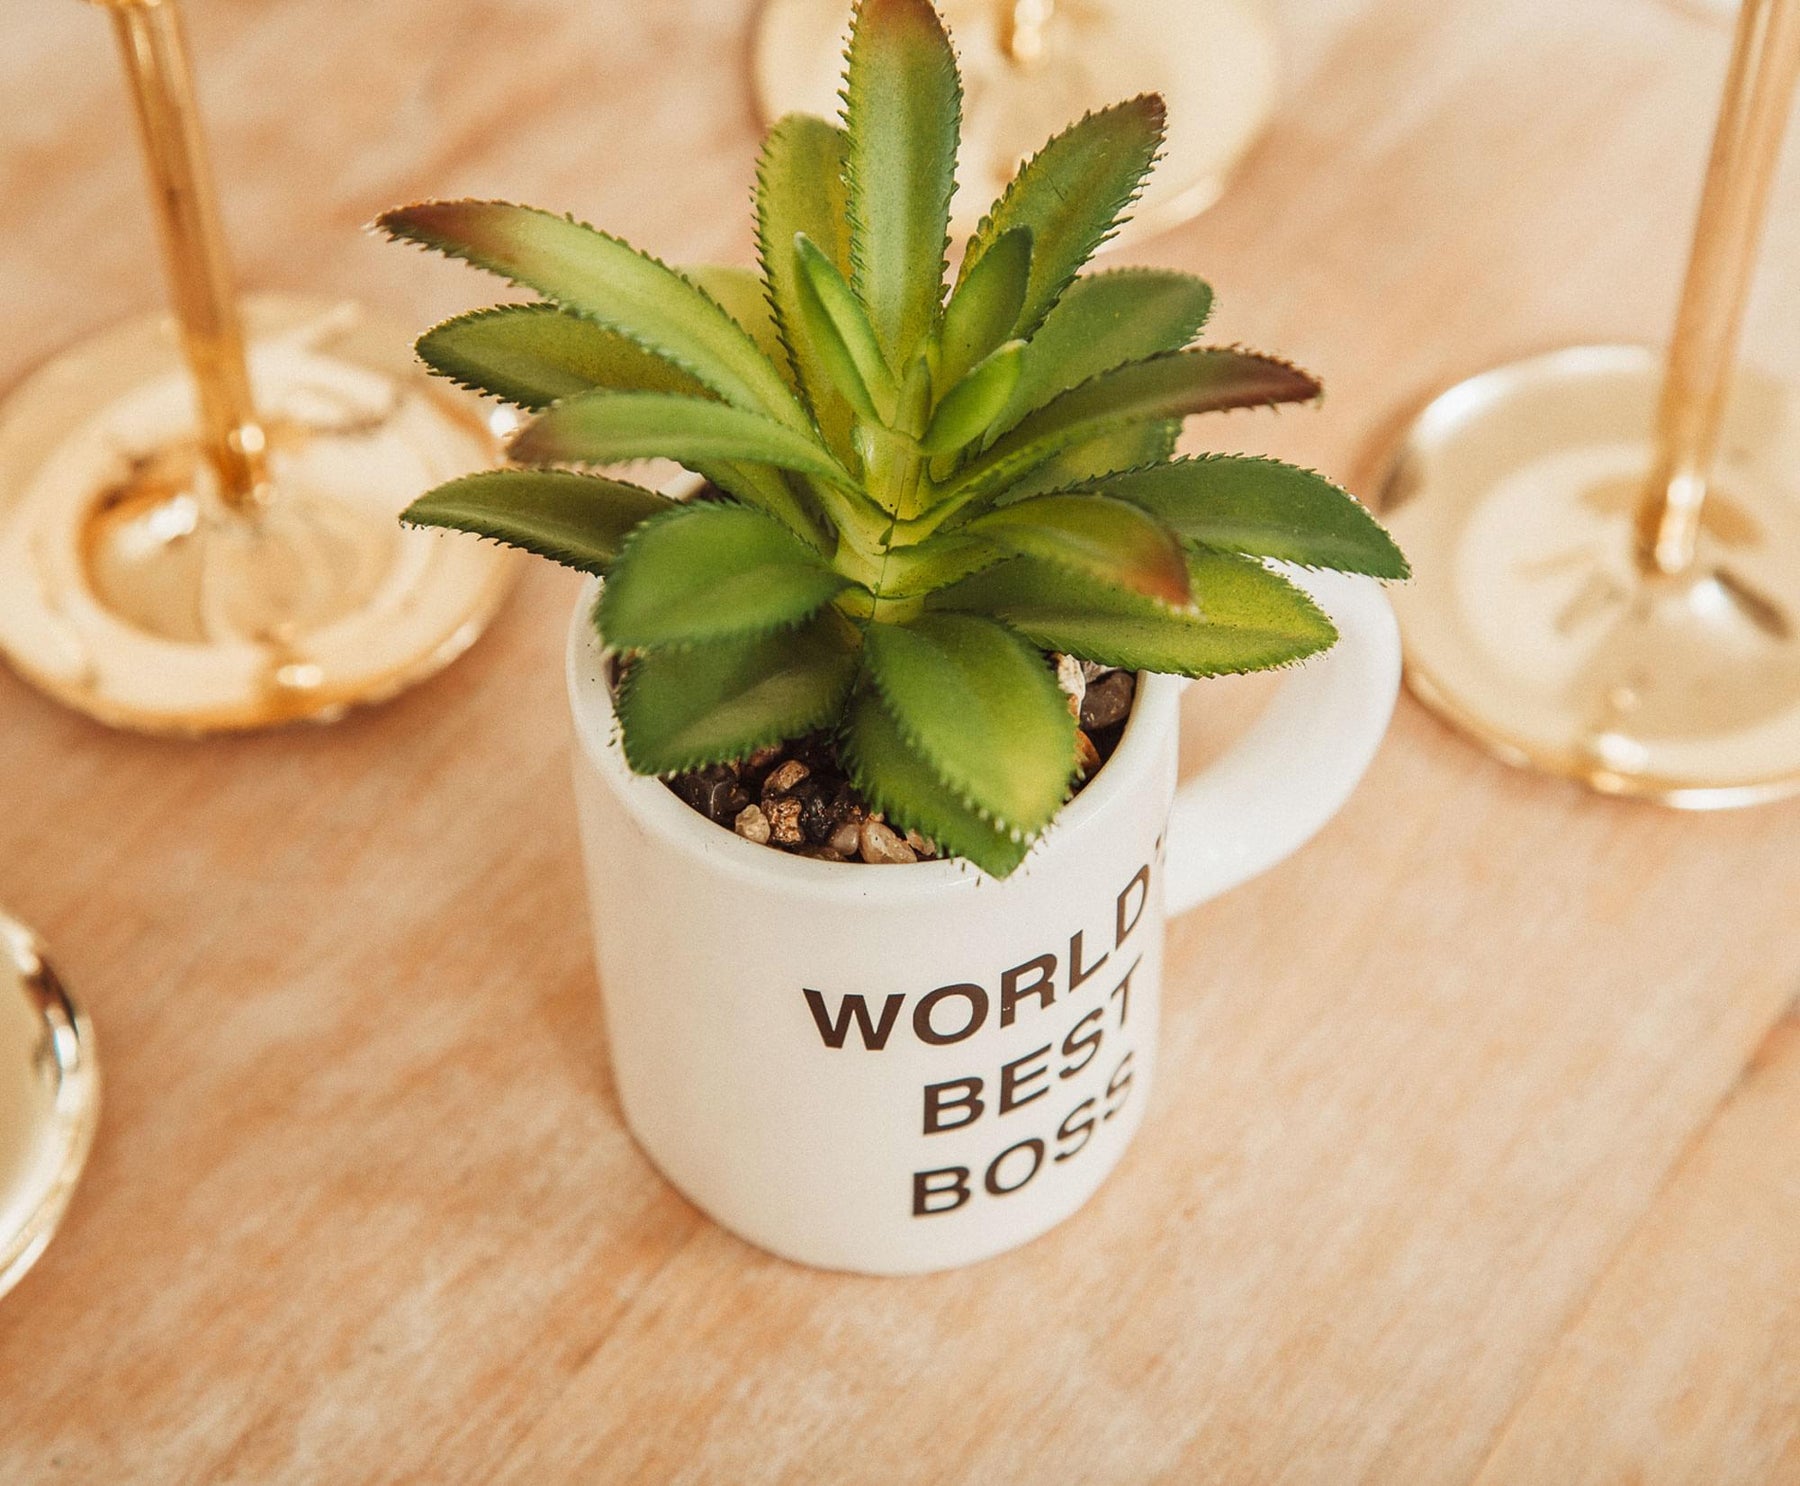 The Office "World's Best Boss" 3-Inch Ceramic Mini Planter With Artificial Succulent